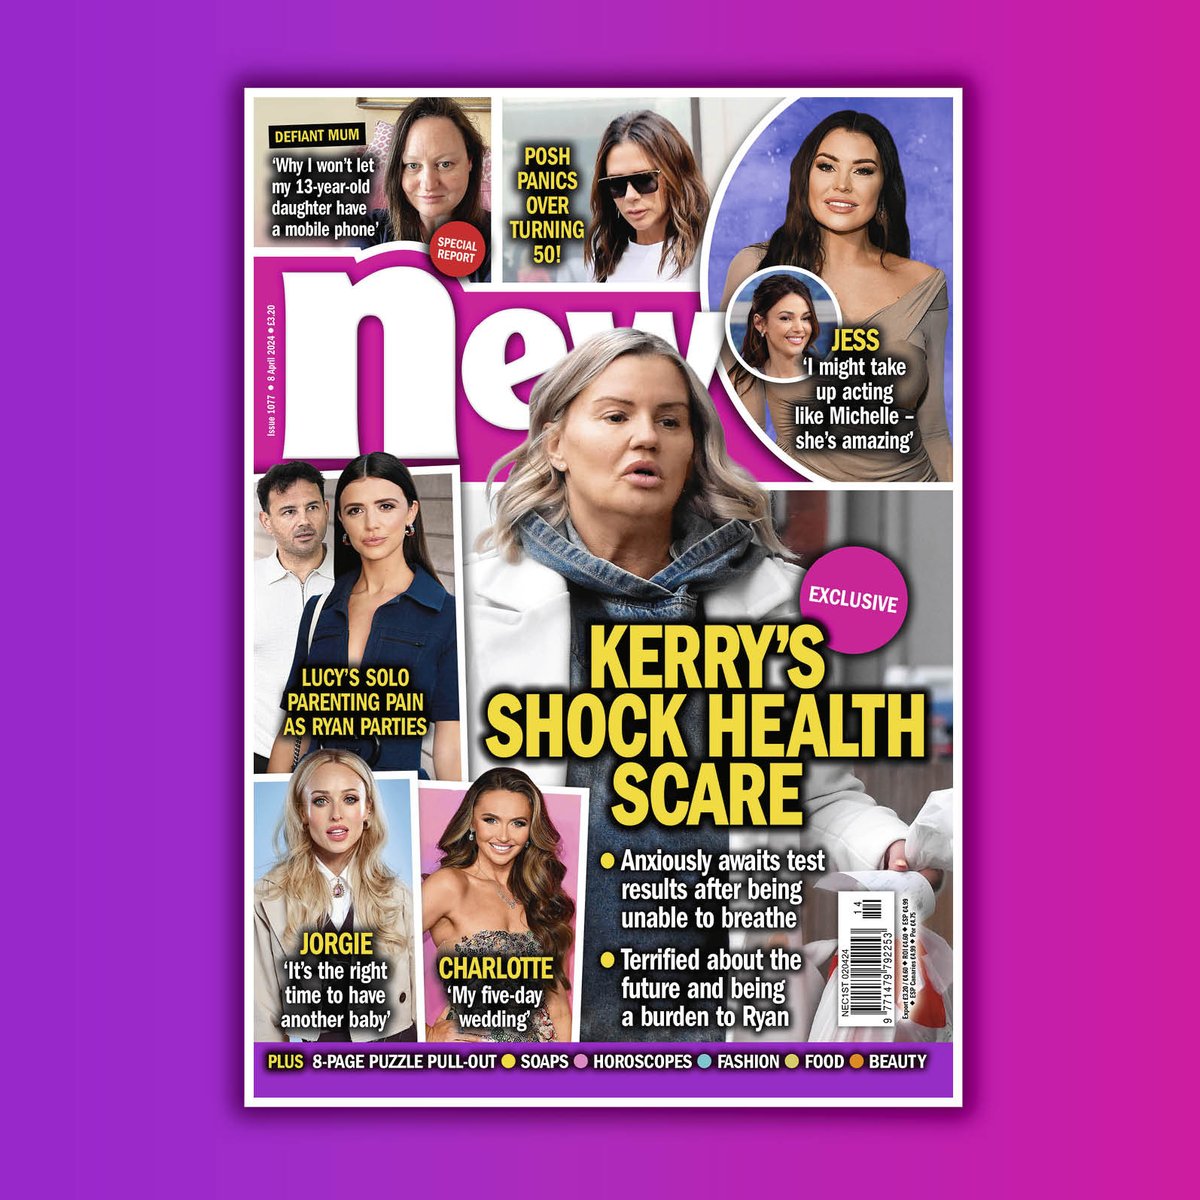 ✨NEW ISSUE ALERT ✨ In this week's issue we cover Kerry's surprising health scare, as she anxiously awaits results.😓 Jess Wright chats about why she might take up acting as Michelle Keegan inspires her, and Jorgie Porter discusses all on second baby and sex life 👀 OUT NOW 💫